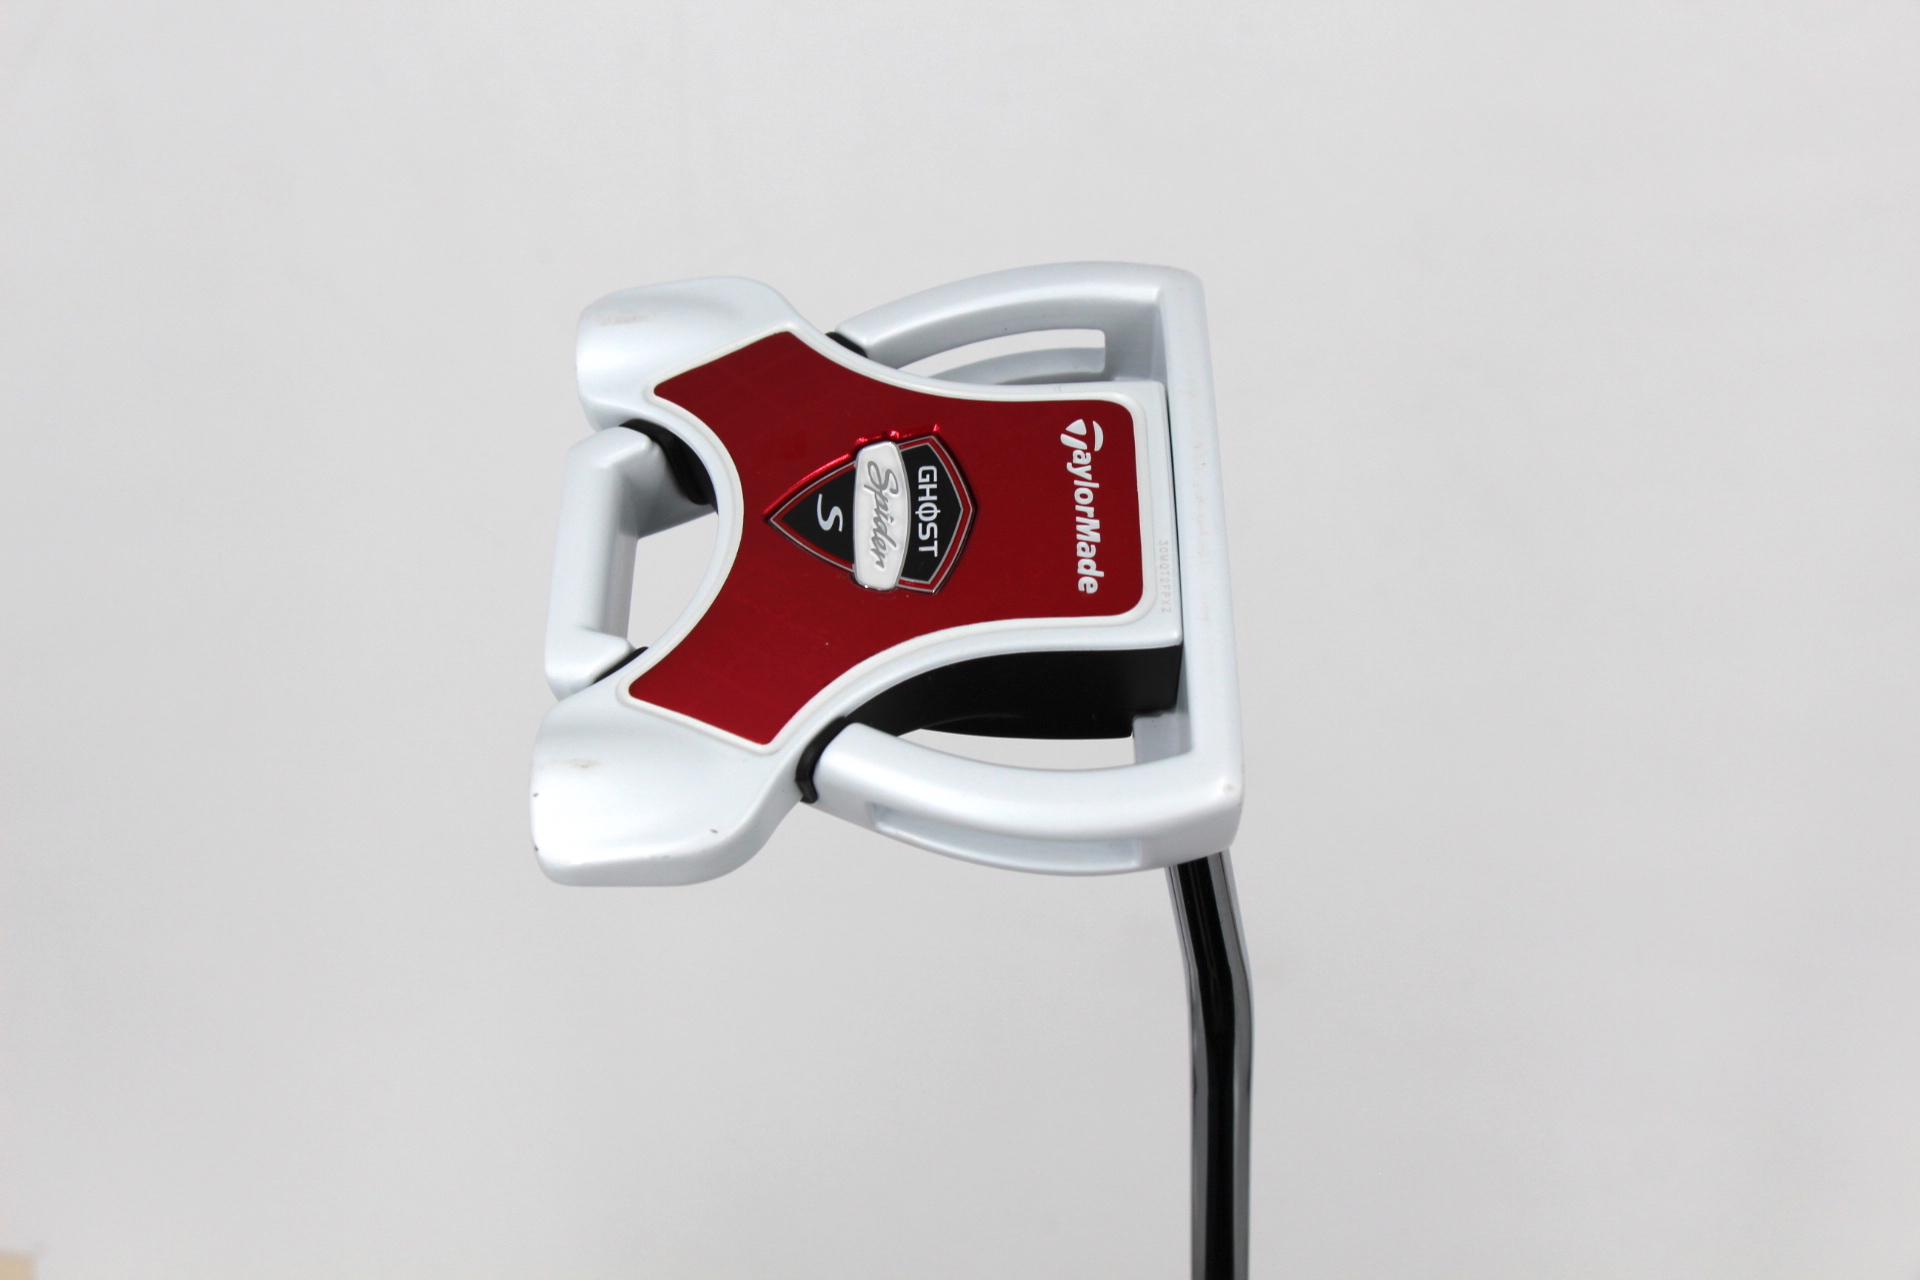 TaylorMade Ghost Spider S Putter